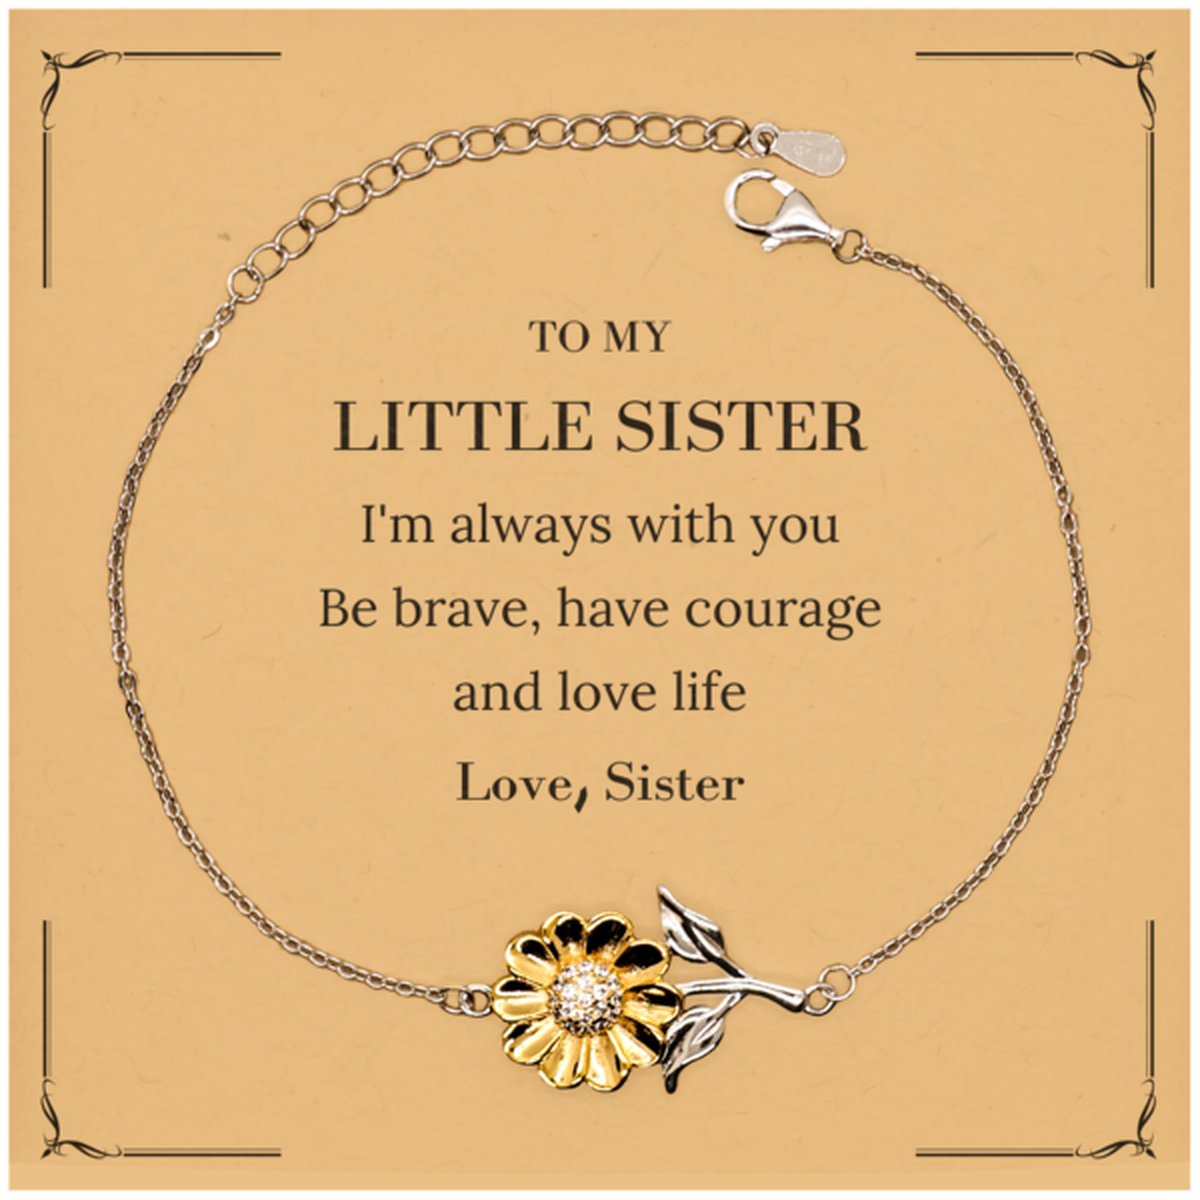 To My Little Sister Gifts from Sister, Unique Sunflower Bracelet Inspirational Christmas Birthday Graduation Gifts for Little Sister I'm always with you. Be brave, have courage and love life. Love, Sister